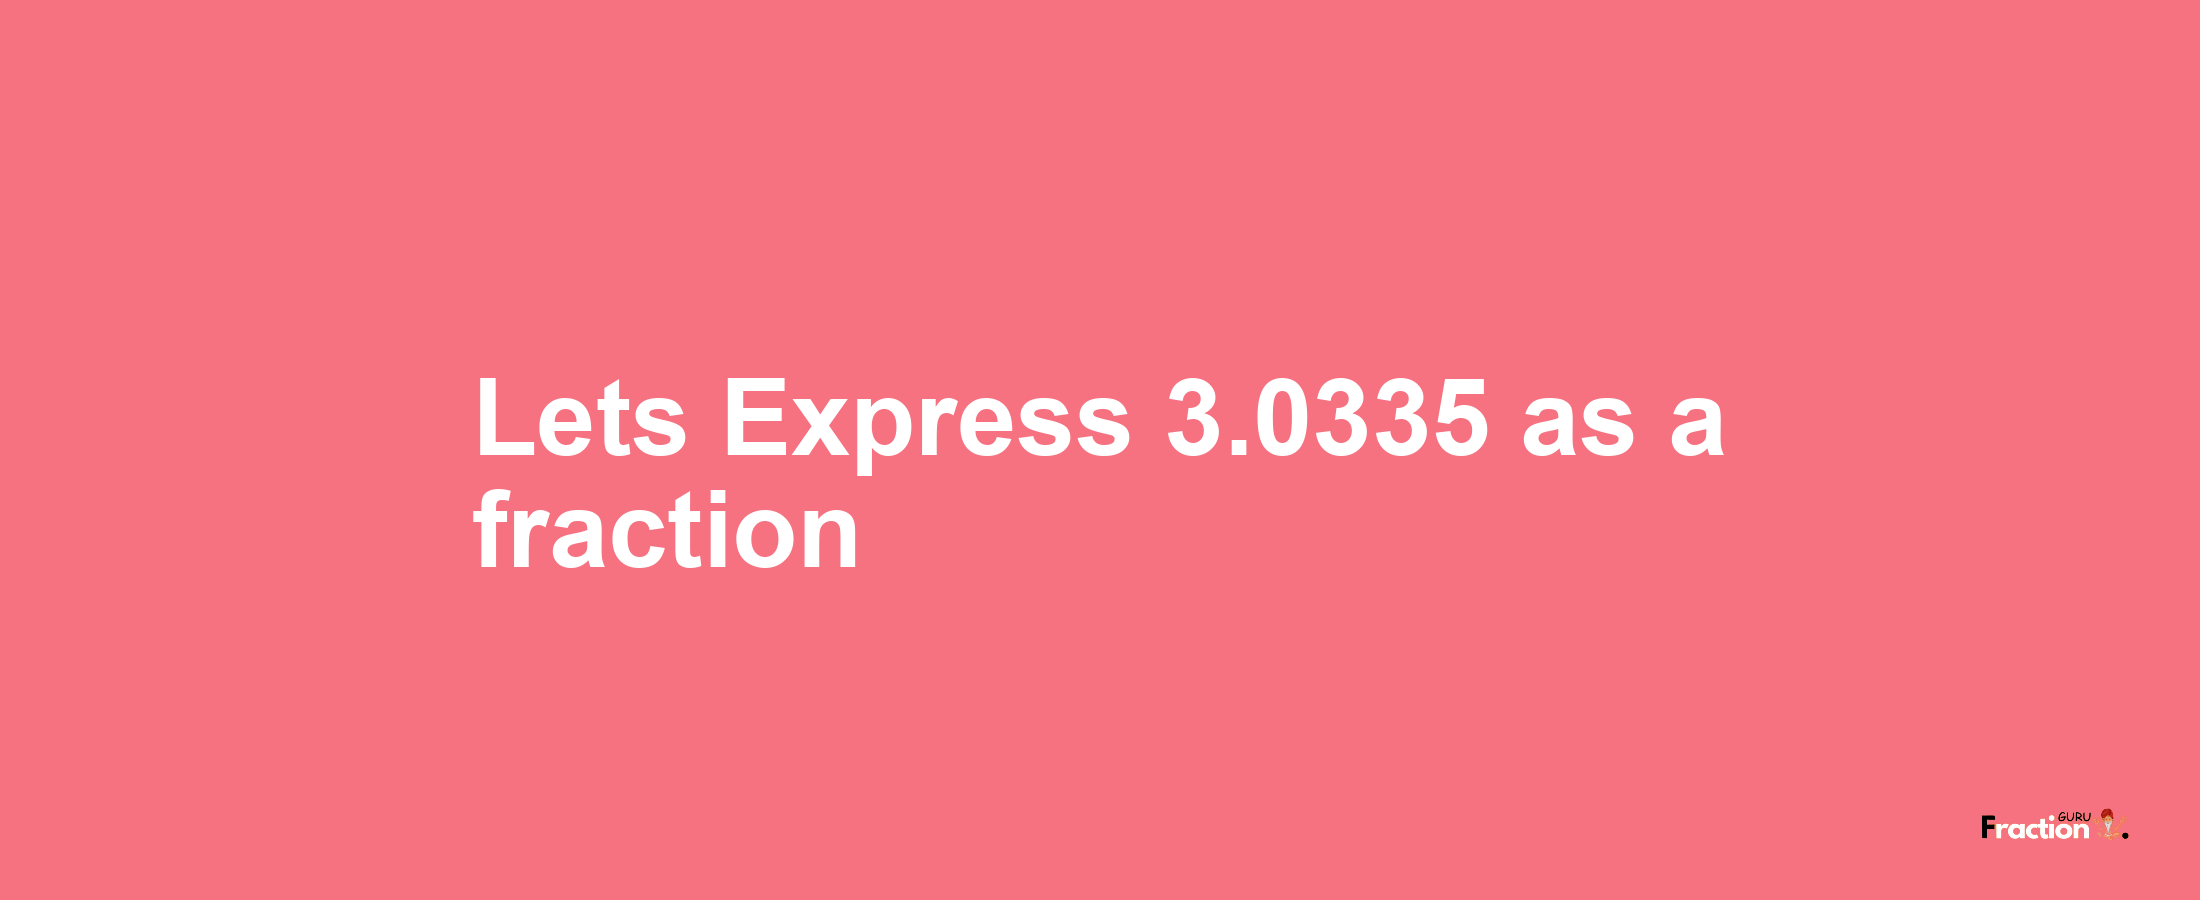 Lets Express 3.0335 as afraction